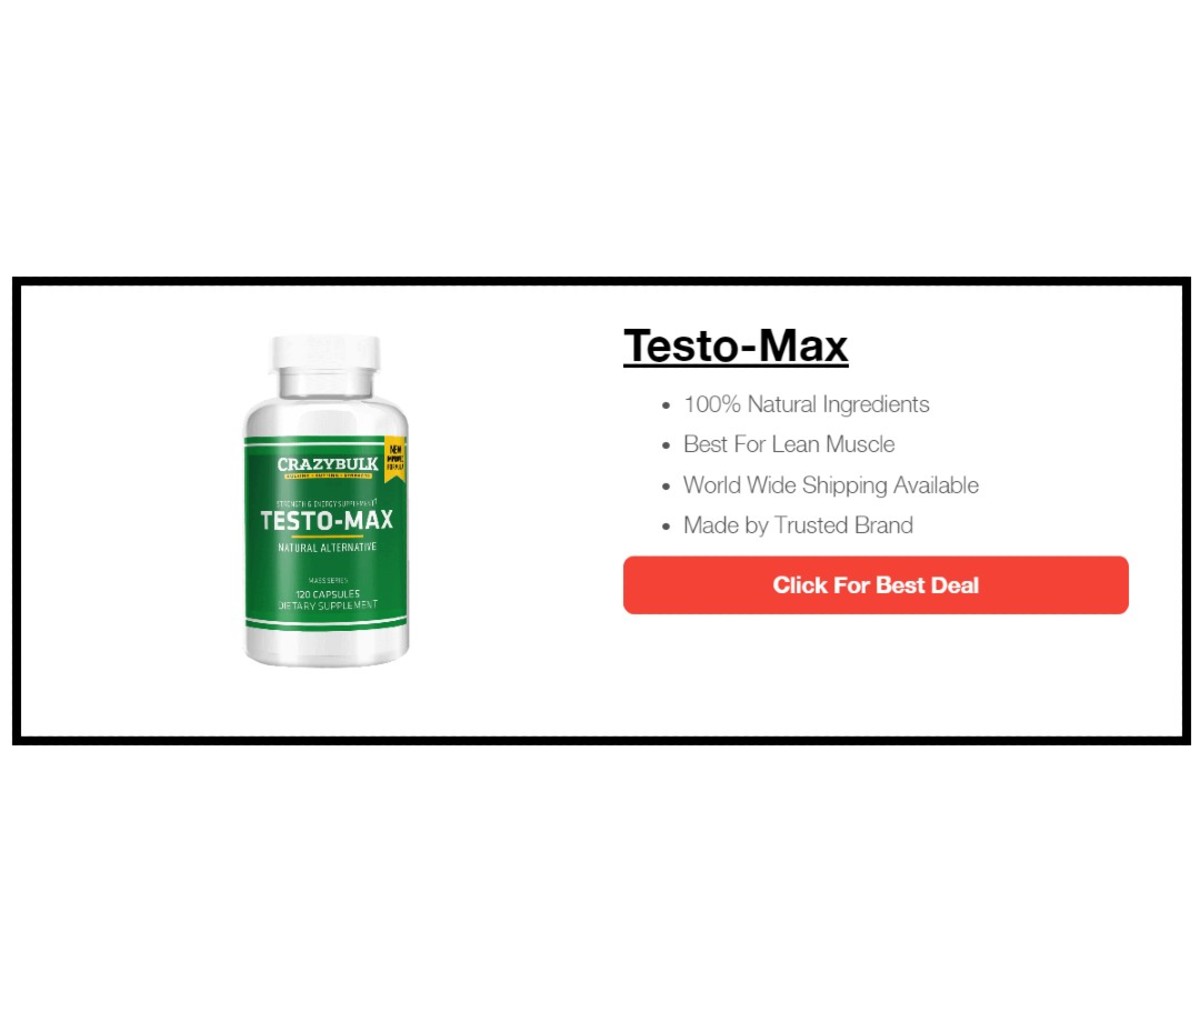 Testo-Max – Best for Lean Muscles